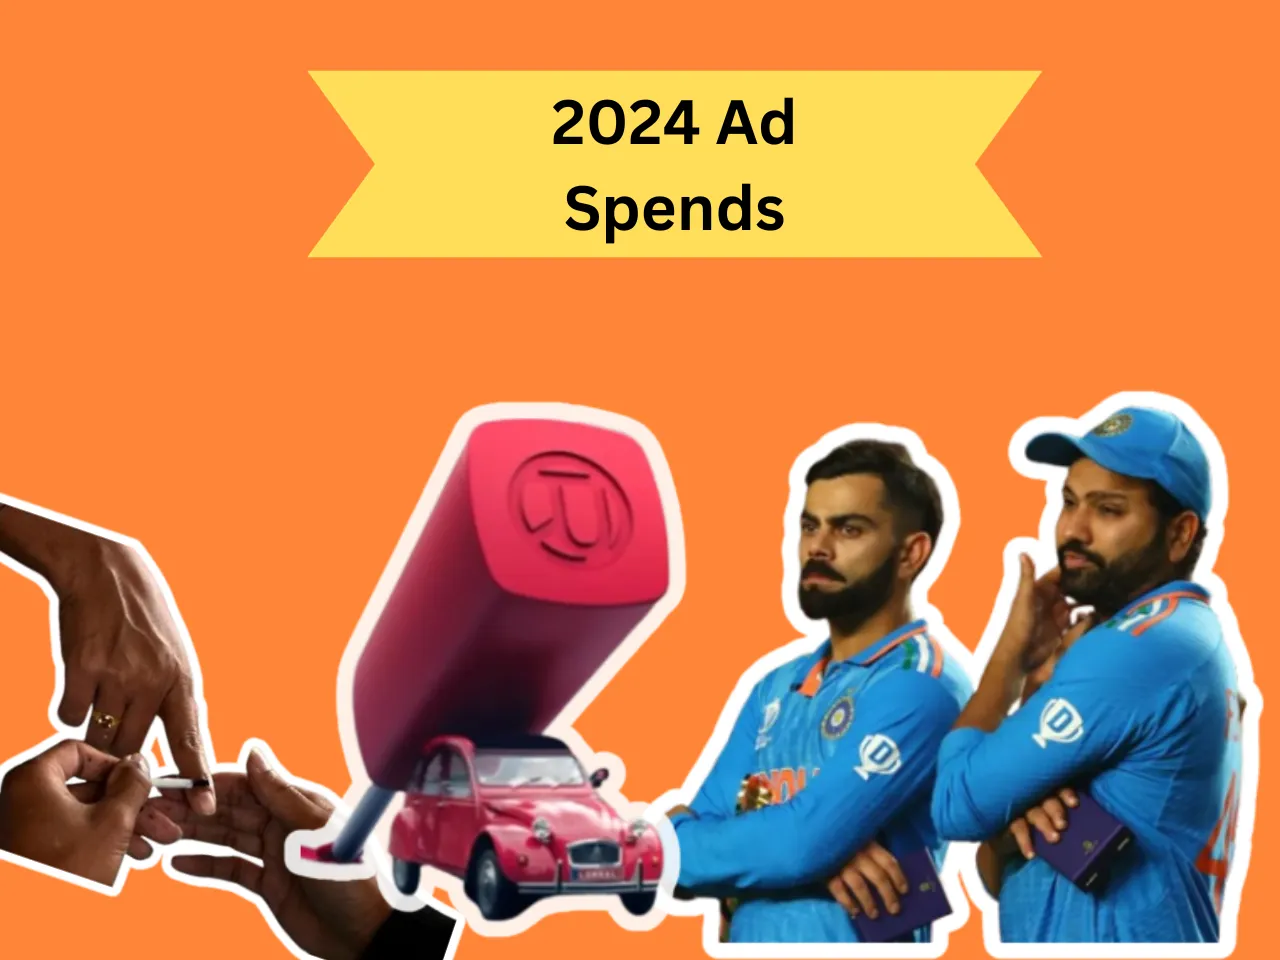 Experts Speak: General Elections, sports & tech expected to drive ad spends in 2024